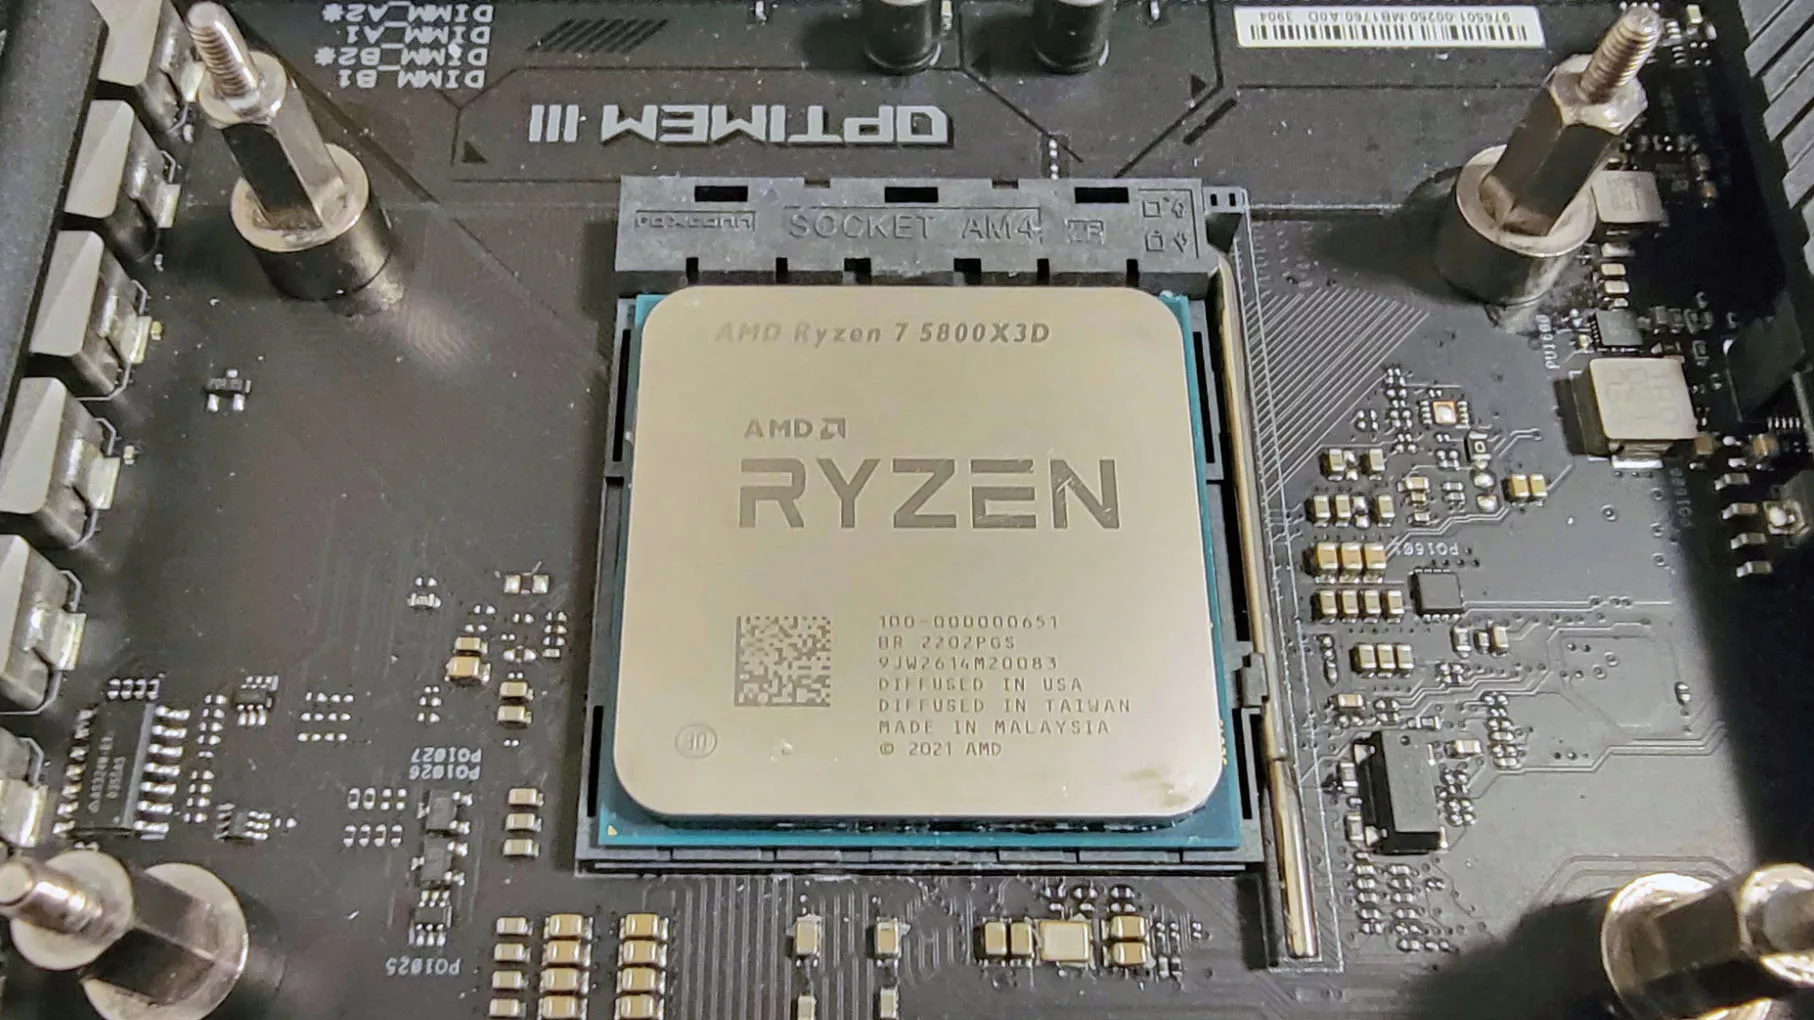 A software bug allows the AMD Ryzen 7 5800X3D to be overclocked to … death – AMD